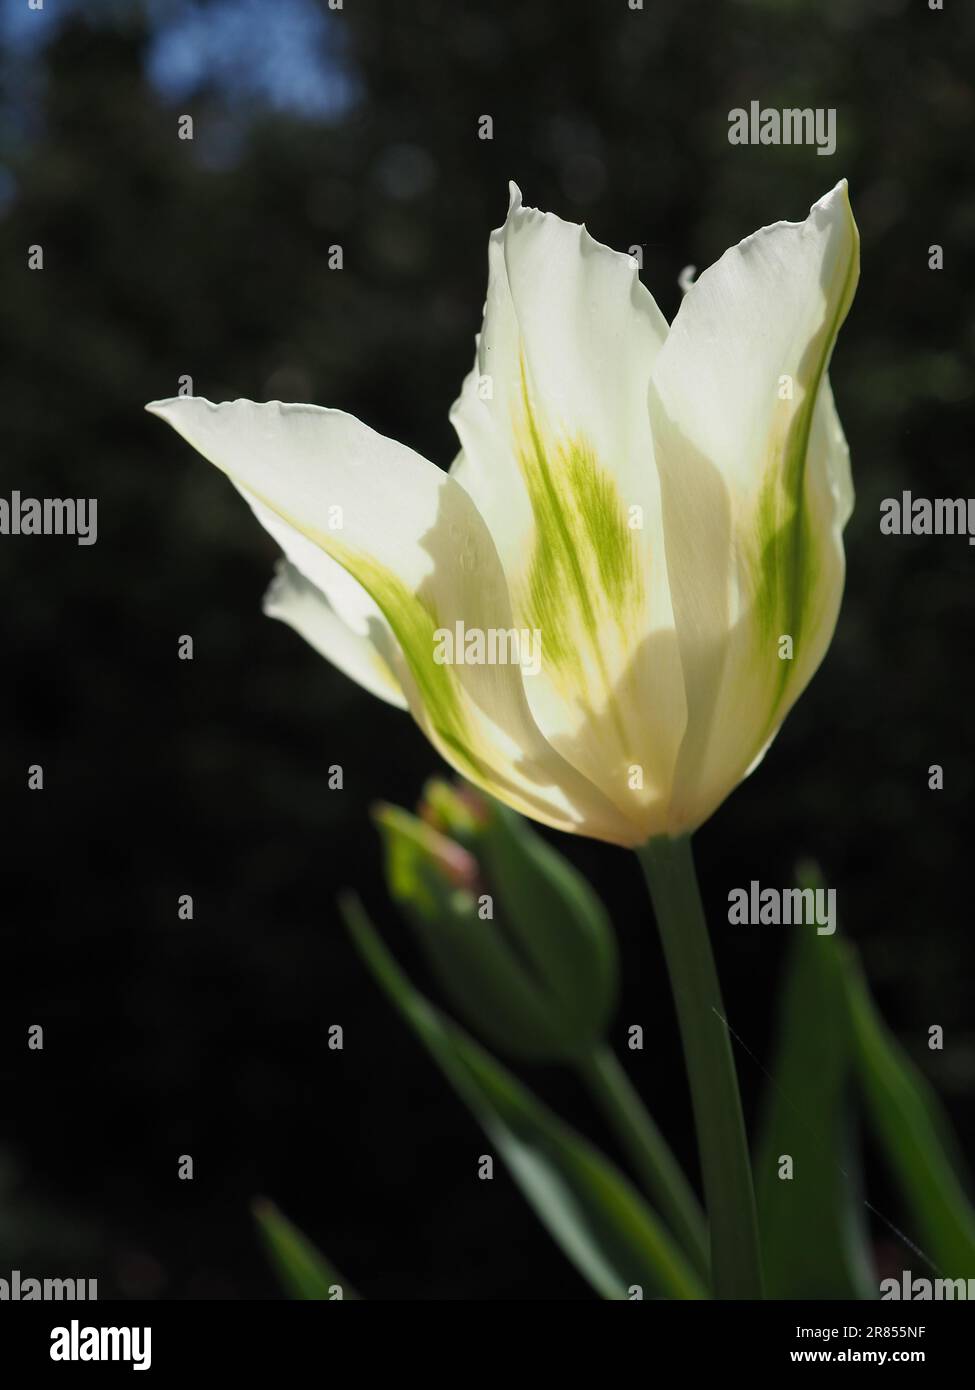 Close up of a Tulip 'Spring Green' flower with the sun shining through the white petals striped with green against a dark contrasting background Stock Photo